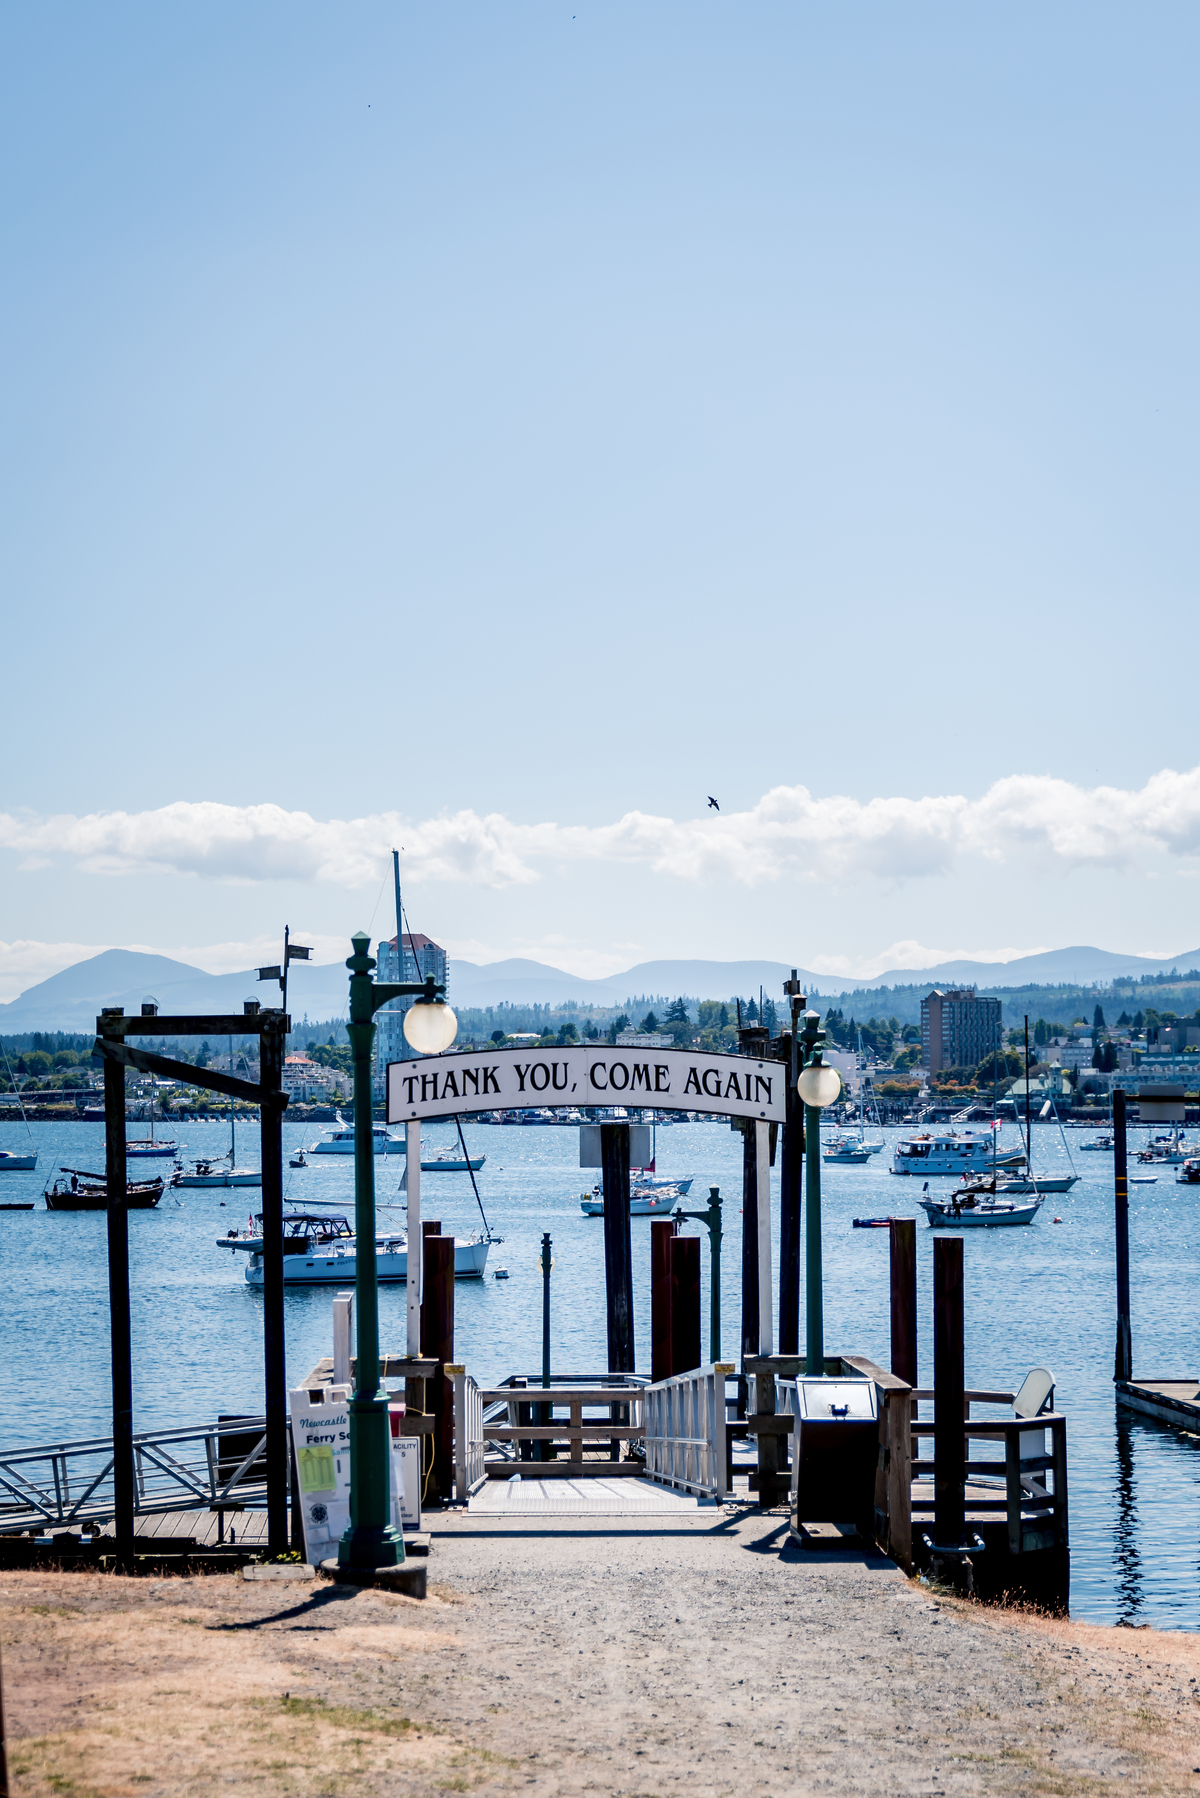 Pier at the harbour with a walkway down to the boat ramp. The words, 